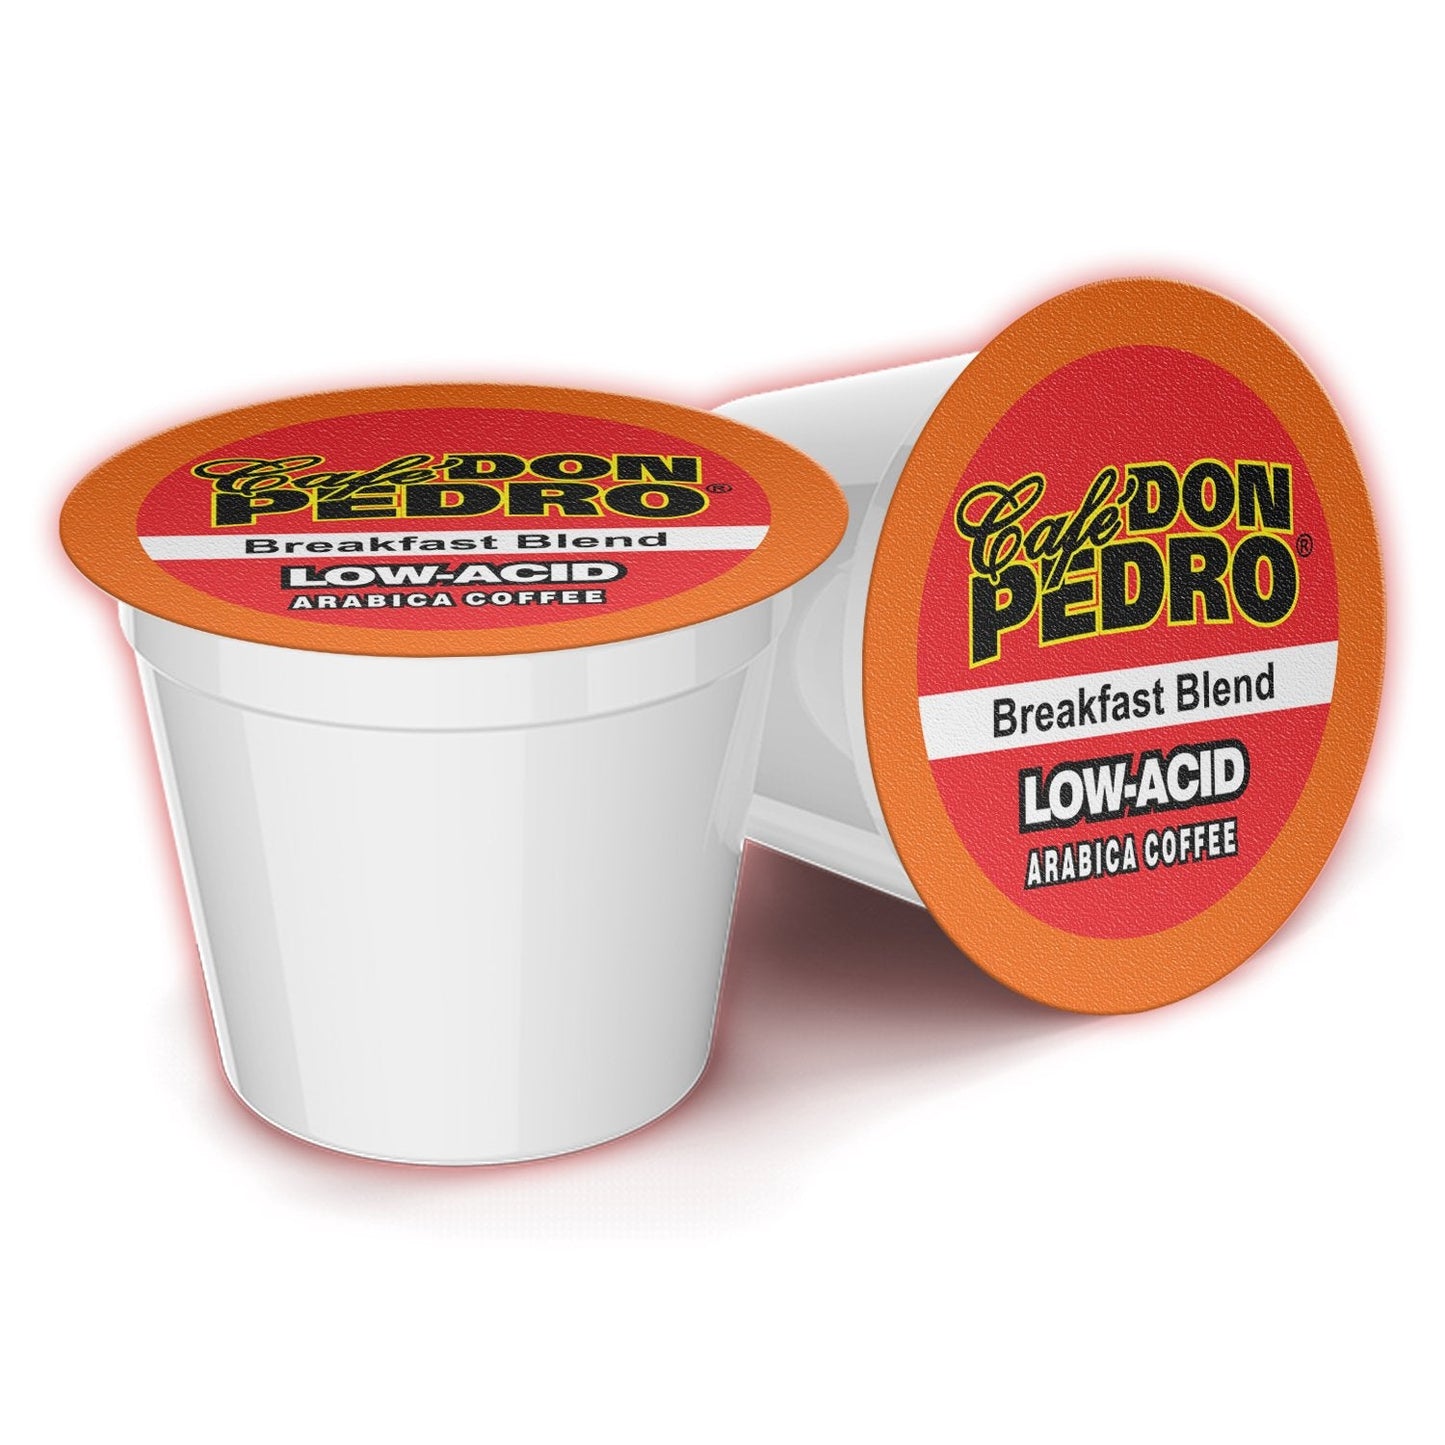 Try one Cafe Don Pedro Low-Acid Single Serve Coffee Pods, 12 ct. For Keurig K-cup maker